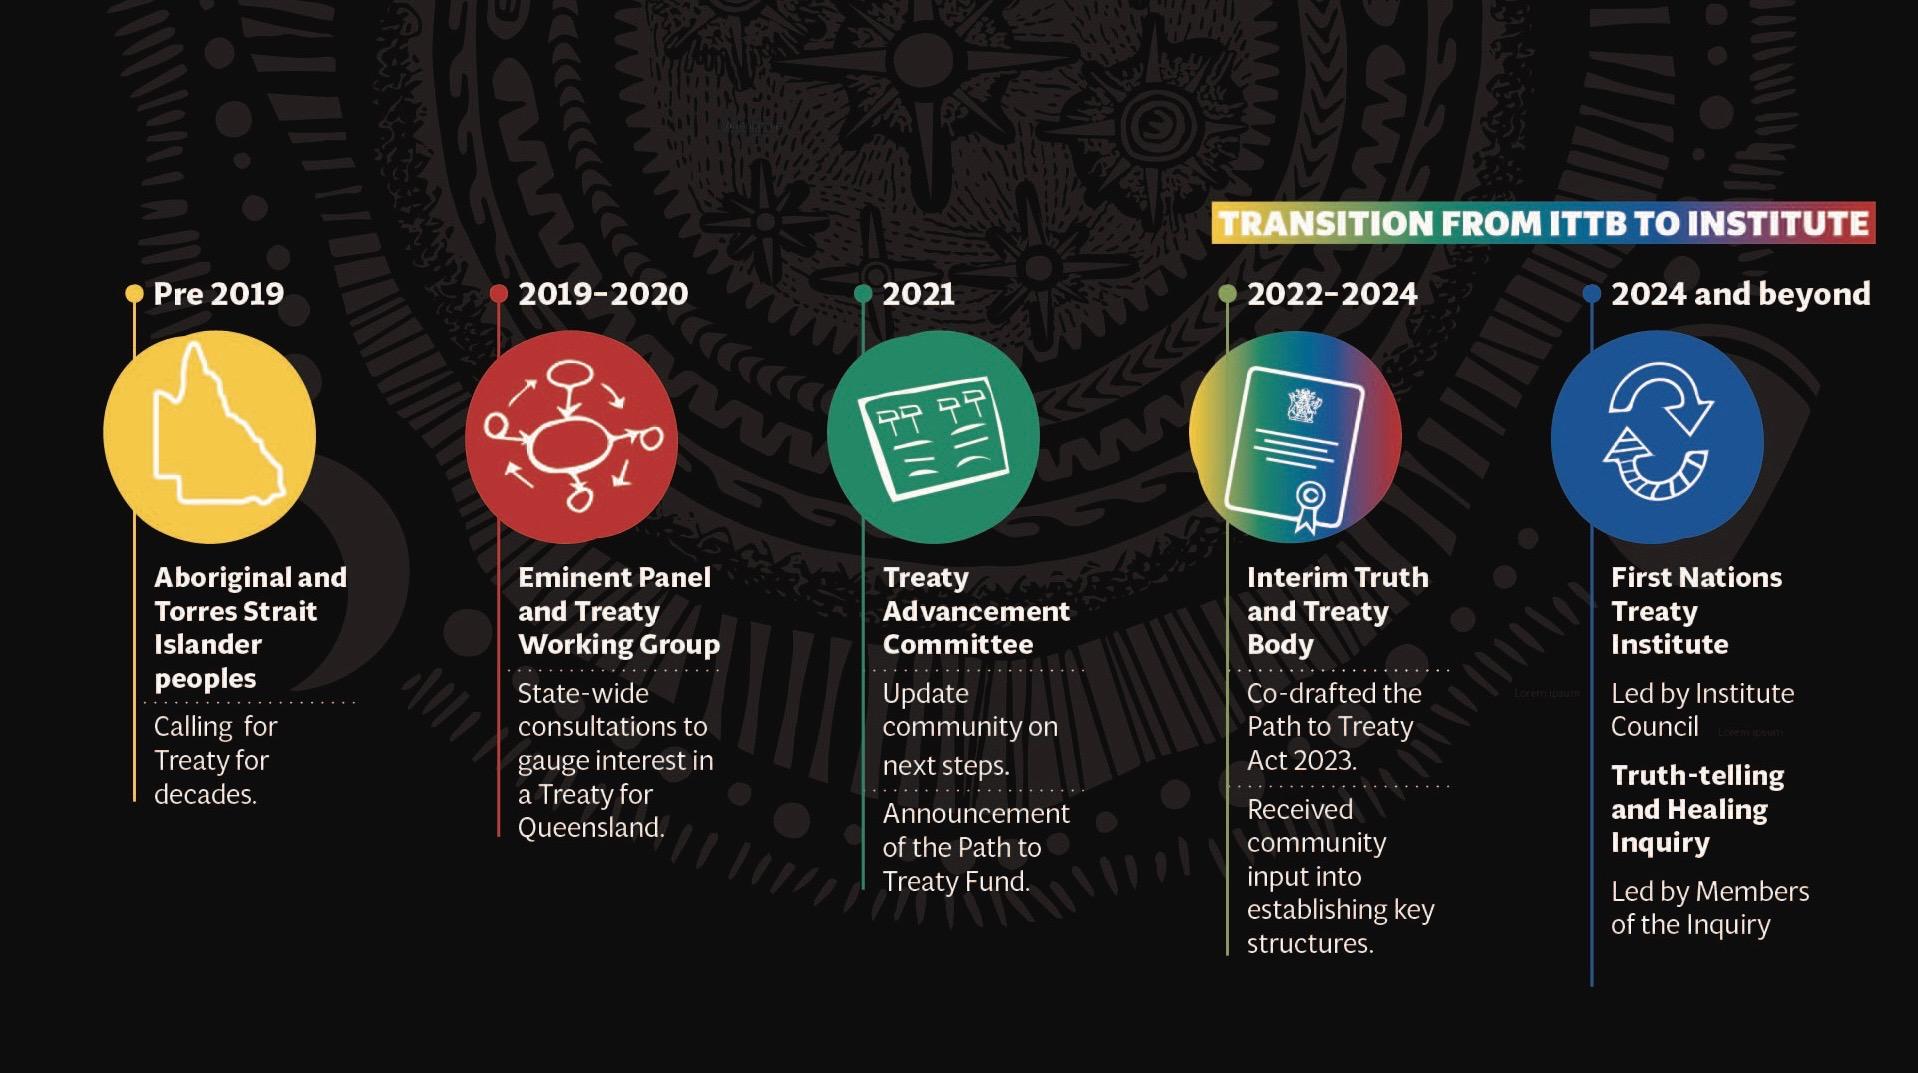 A timeline of the path to treaty in Queensland up to the formation of the First Nations Treaty Institute and establishment of the Truth-telling and Healing Inquiry